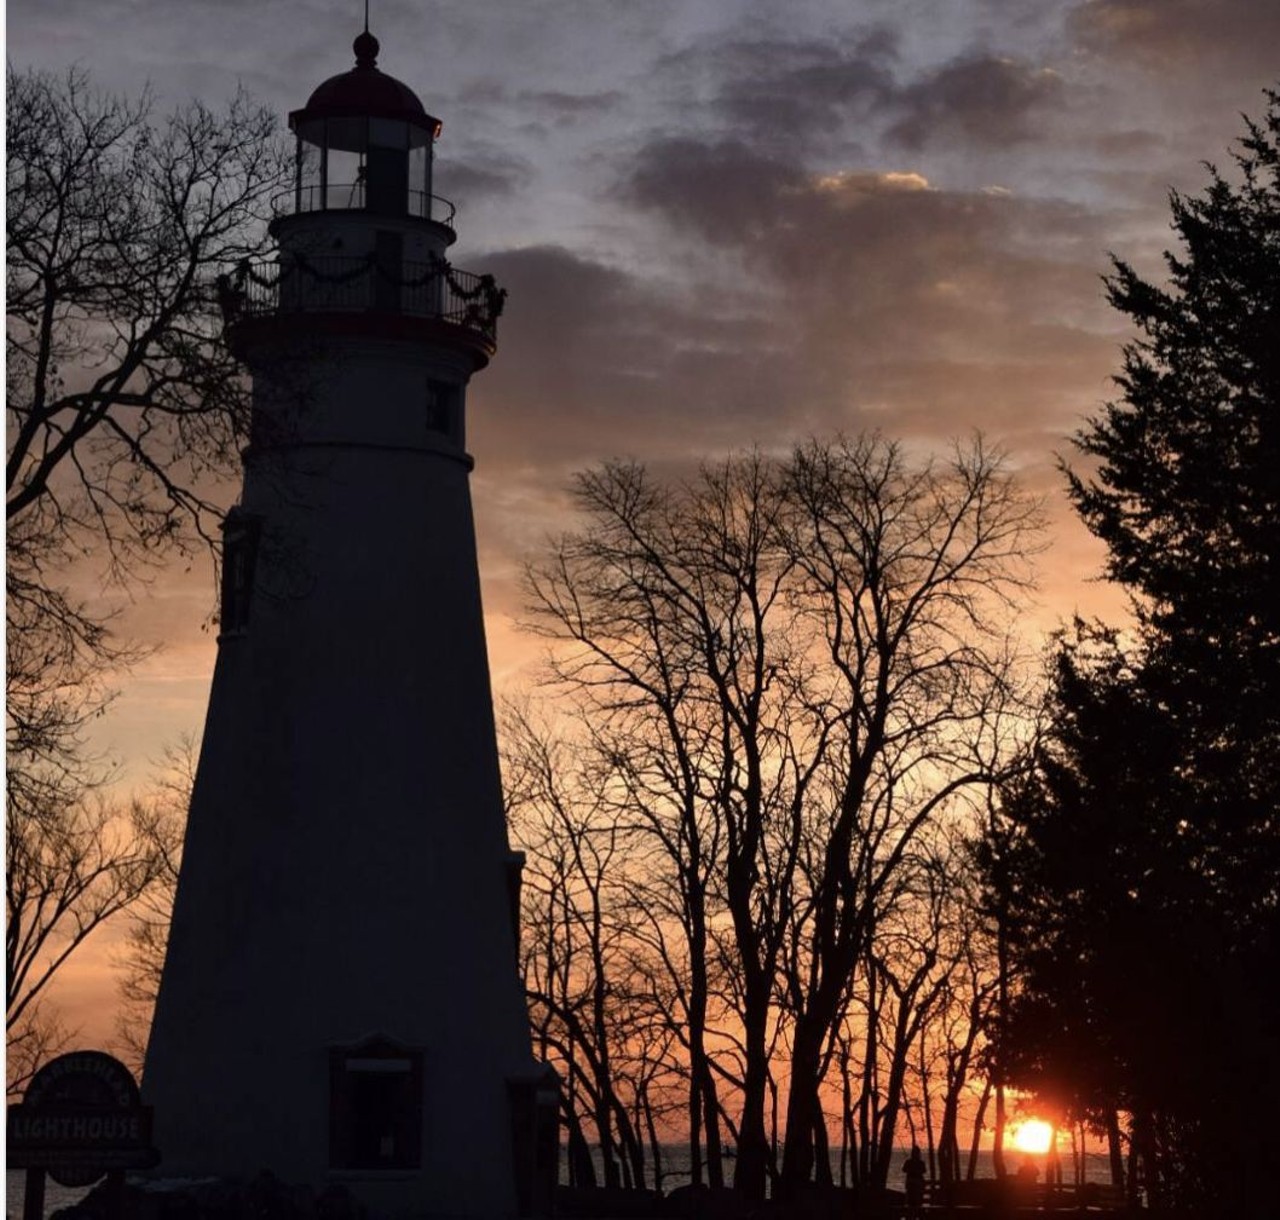  Marblehead
Marblehead boasts one the best scenic lighthouses in Ohio, perfect for taking in a spring sunset
Photo via @_Doctor_VV_/Instagram